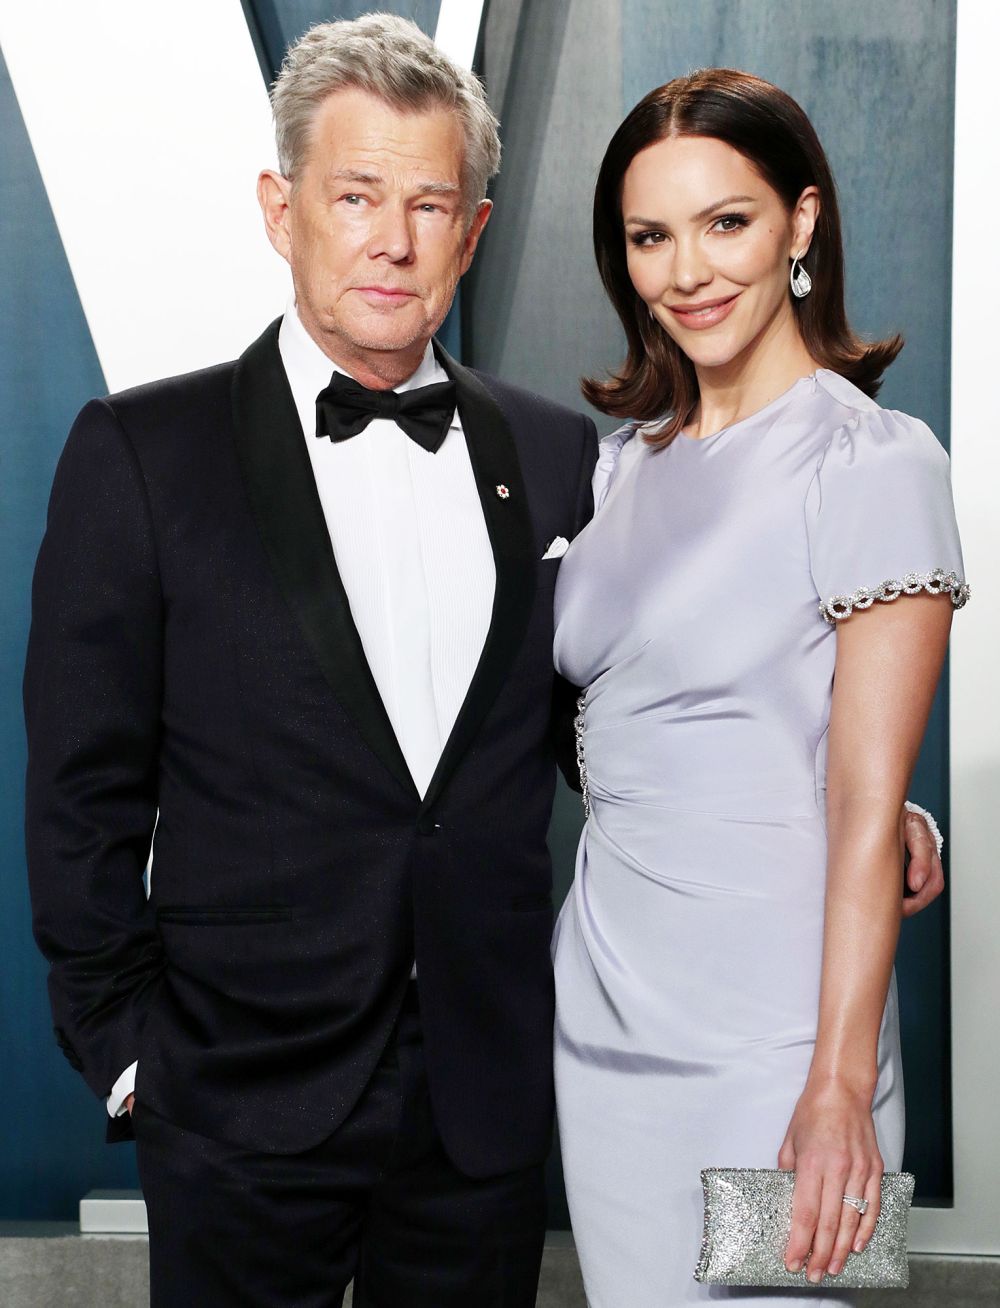 David Foster and Katharine McPhee attend the Vanity Fair Oscar Party Pregnant Katharine McPhee Gives First Glimpse of Bare Baby Bump